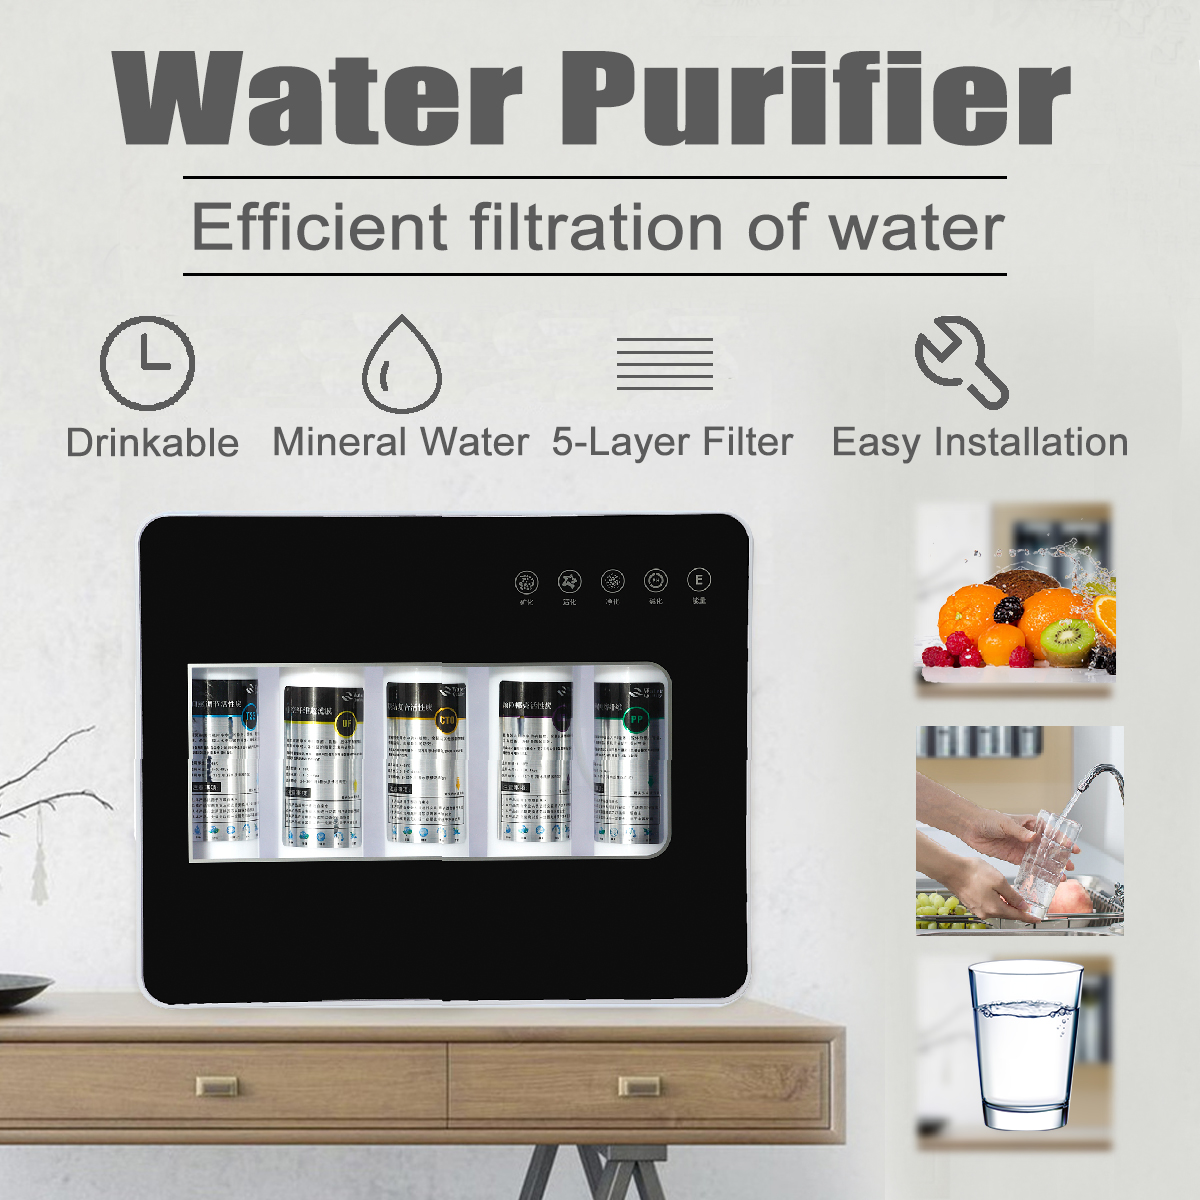 001mum-5-Stage-Water-Purifier-Household-Drinking-Faucet-Water-Filter-For-Kitchen-1571288-1